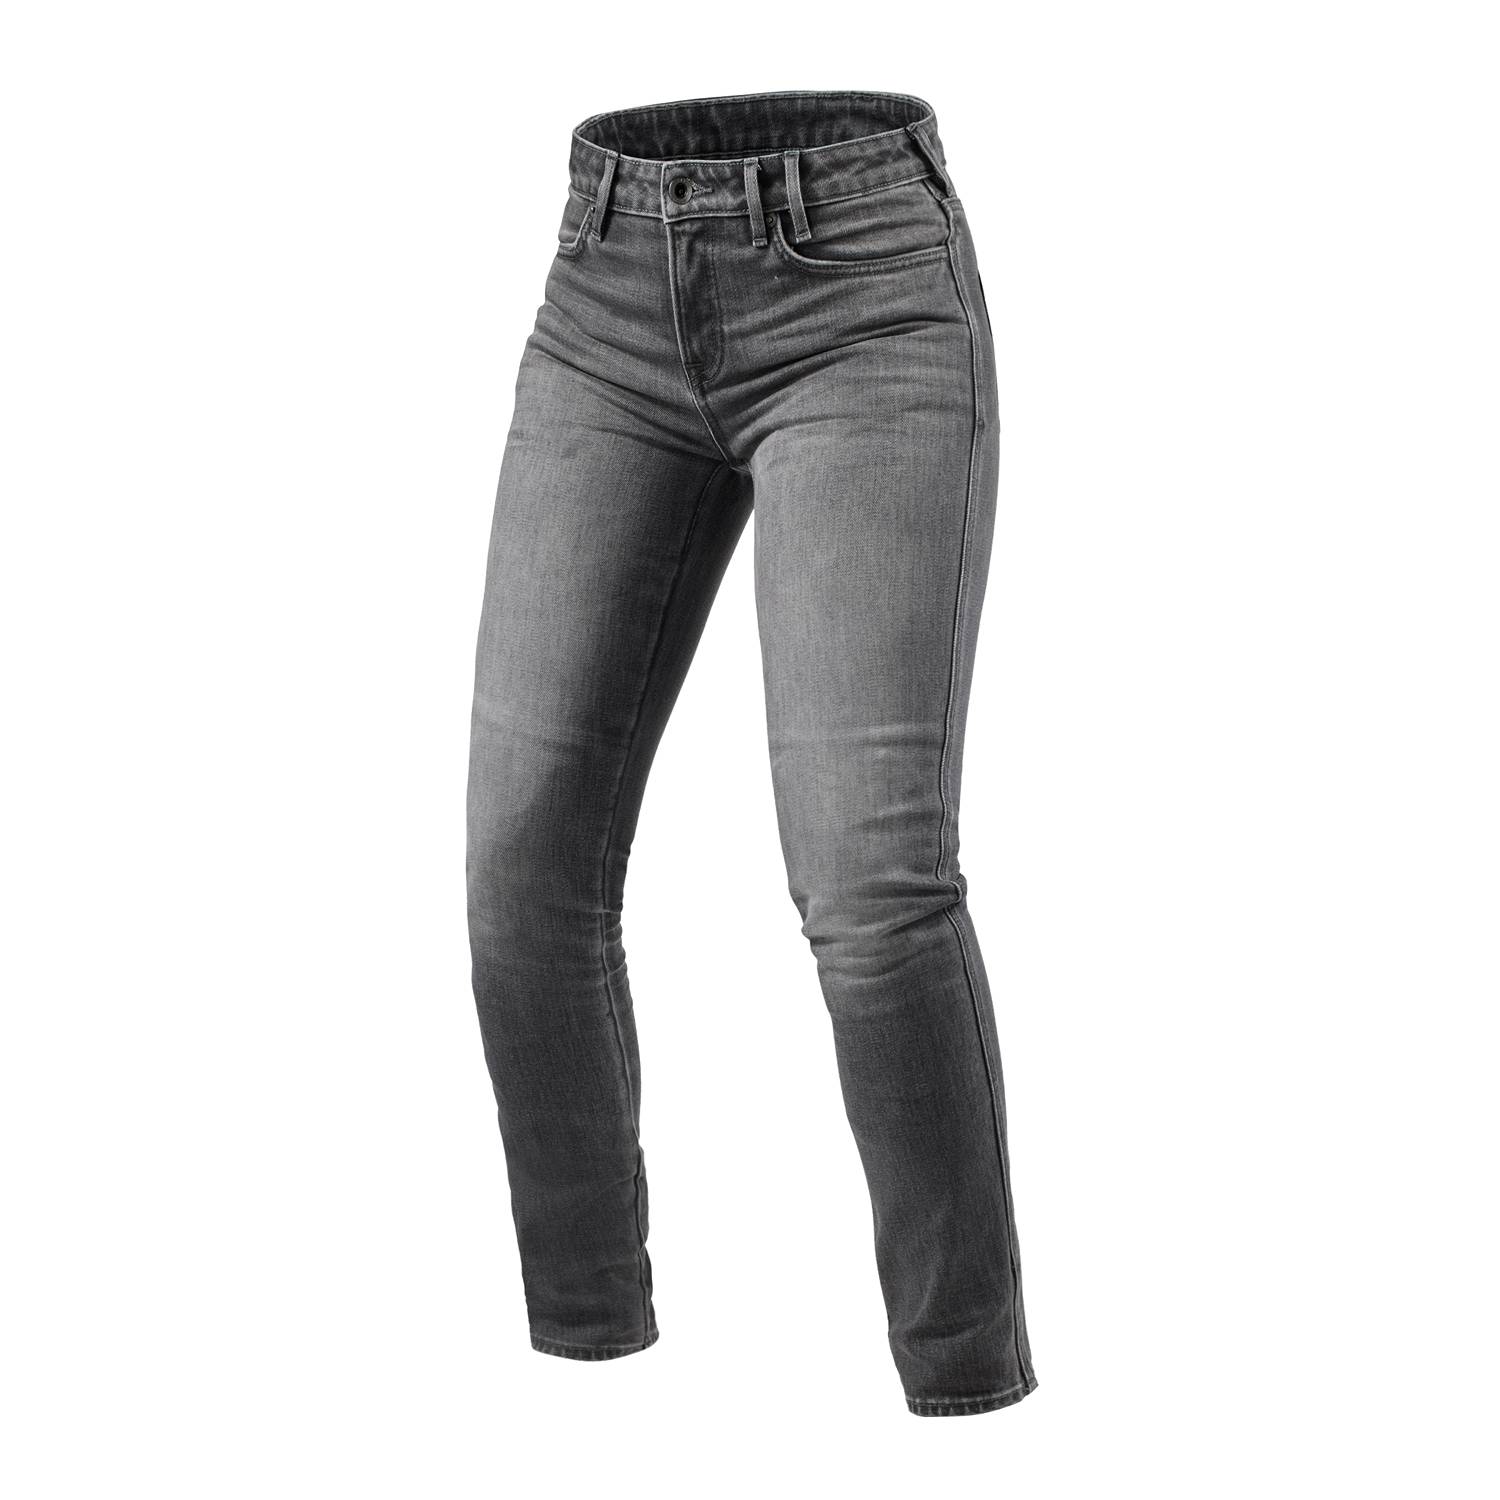 Image of REV'IT! Jeans Shelby 2 Ladies SK Medium Grey Stone L32 Taille L32/W27